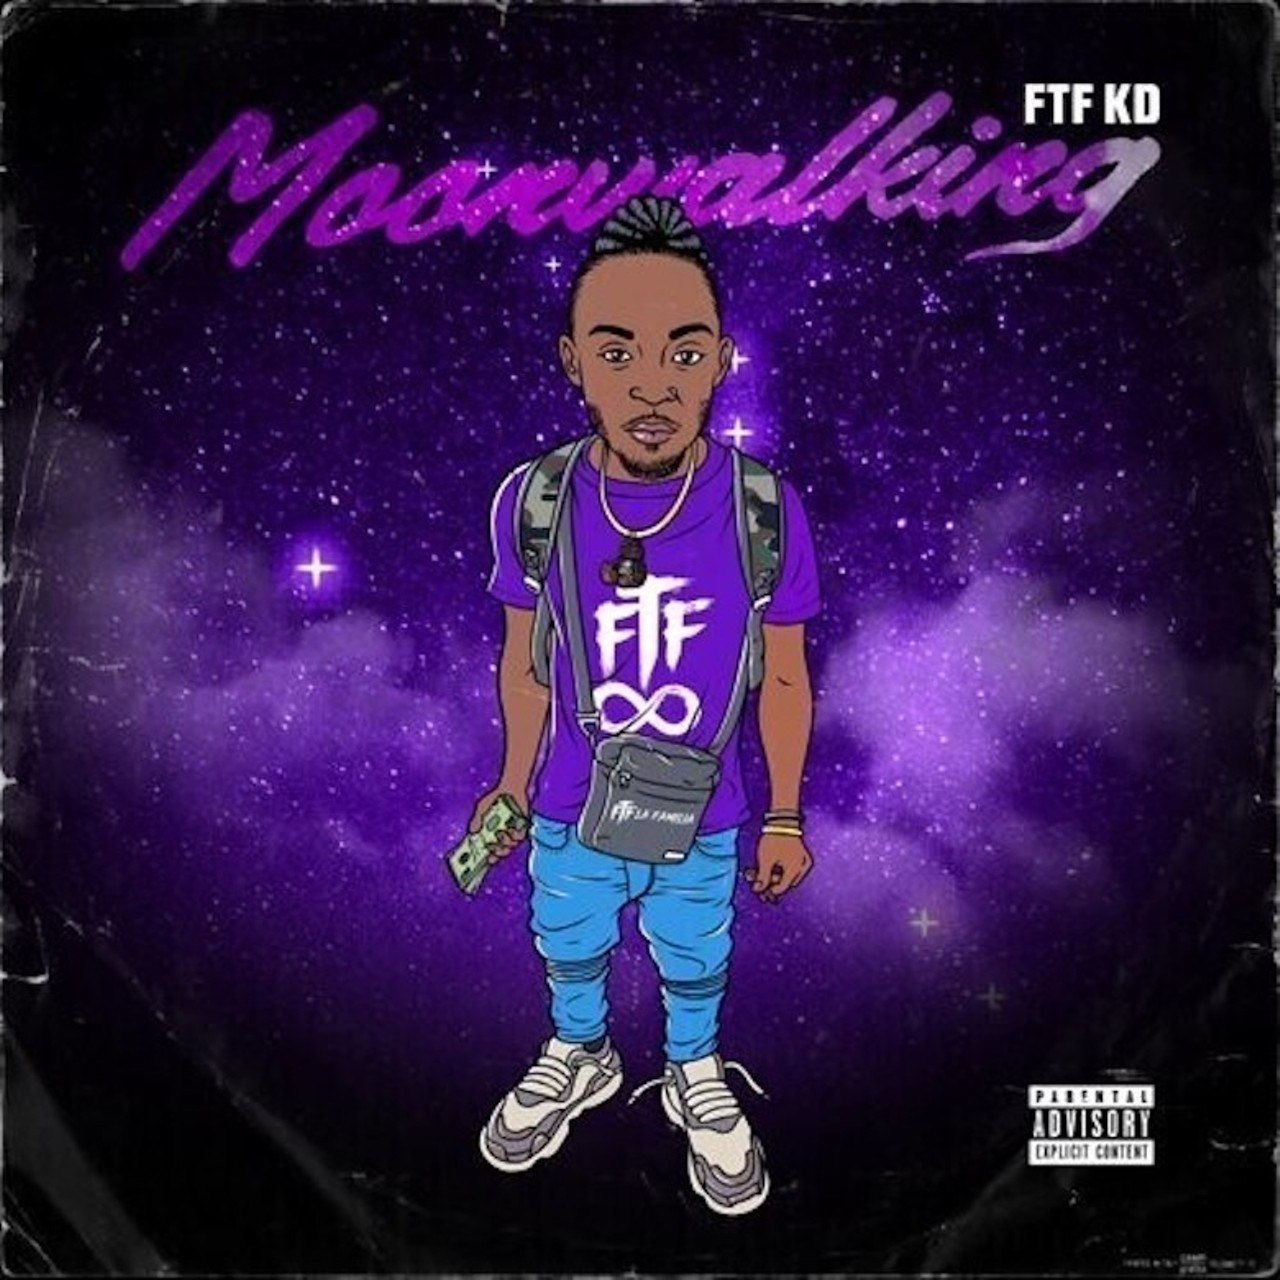 FTF KD
MOONWALKING
&#147;My process is to choose the beats and then, a few days before my scheduled studio time, I sit down and write to that beat,&#148; said Arkansas-born rapper FTF KD. That creative cycle has seen a flurry of activity all year, with KD releasing one single after another. &#147;MOONWALKING&#148; stands out for its elevated, smooth energy, a nod to his West Coast favorites and Side 3 Studios in Denver, Colorado, where KD recorded it. You can&#146;t understand this artist without acknowledging the Louisville influence. He made Kentucky his home and in 2020 launched his music career, with Evo Auditory being one of his favorite studios. Compare his earliest drops to &#147;MOONWALKING,&#148; released last month, and you&#146;ll notice he evolved quickly without abandoning the sound he first presented. &#151;Sarah Kinbar
Listen on Spotify